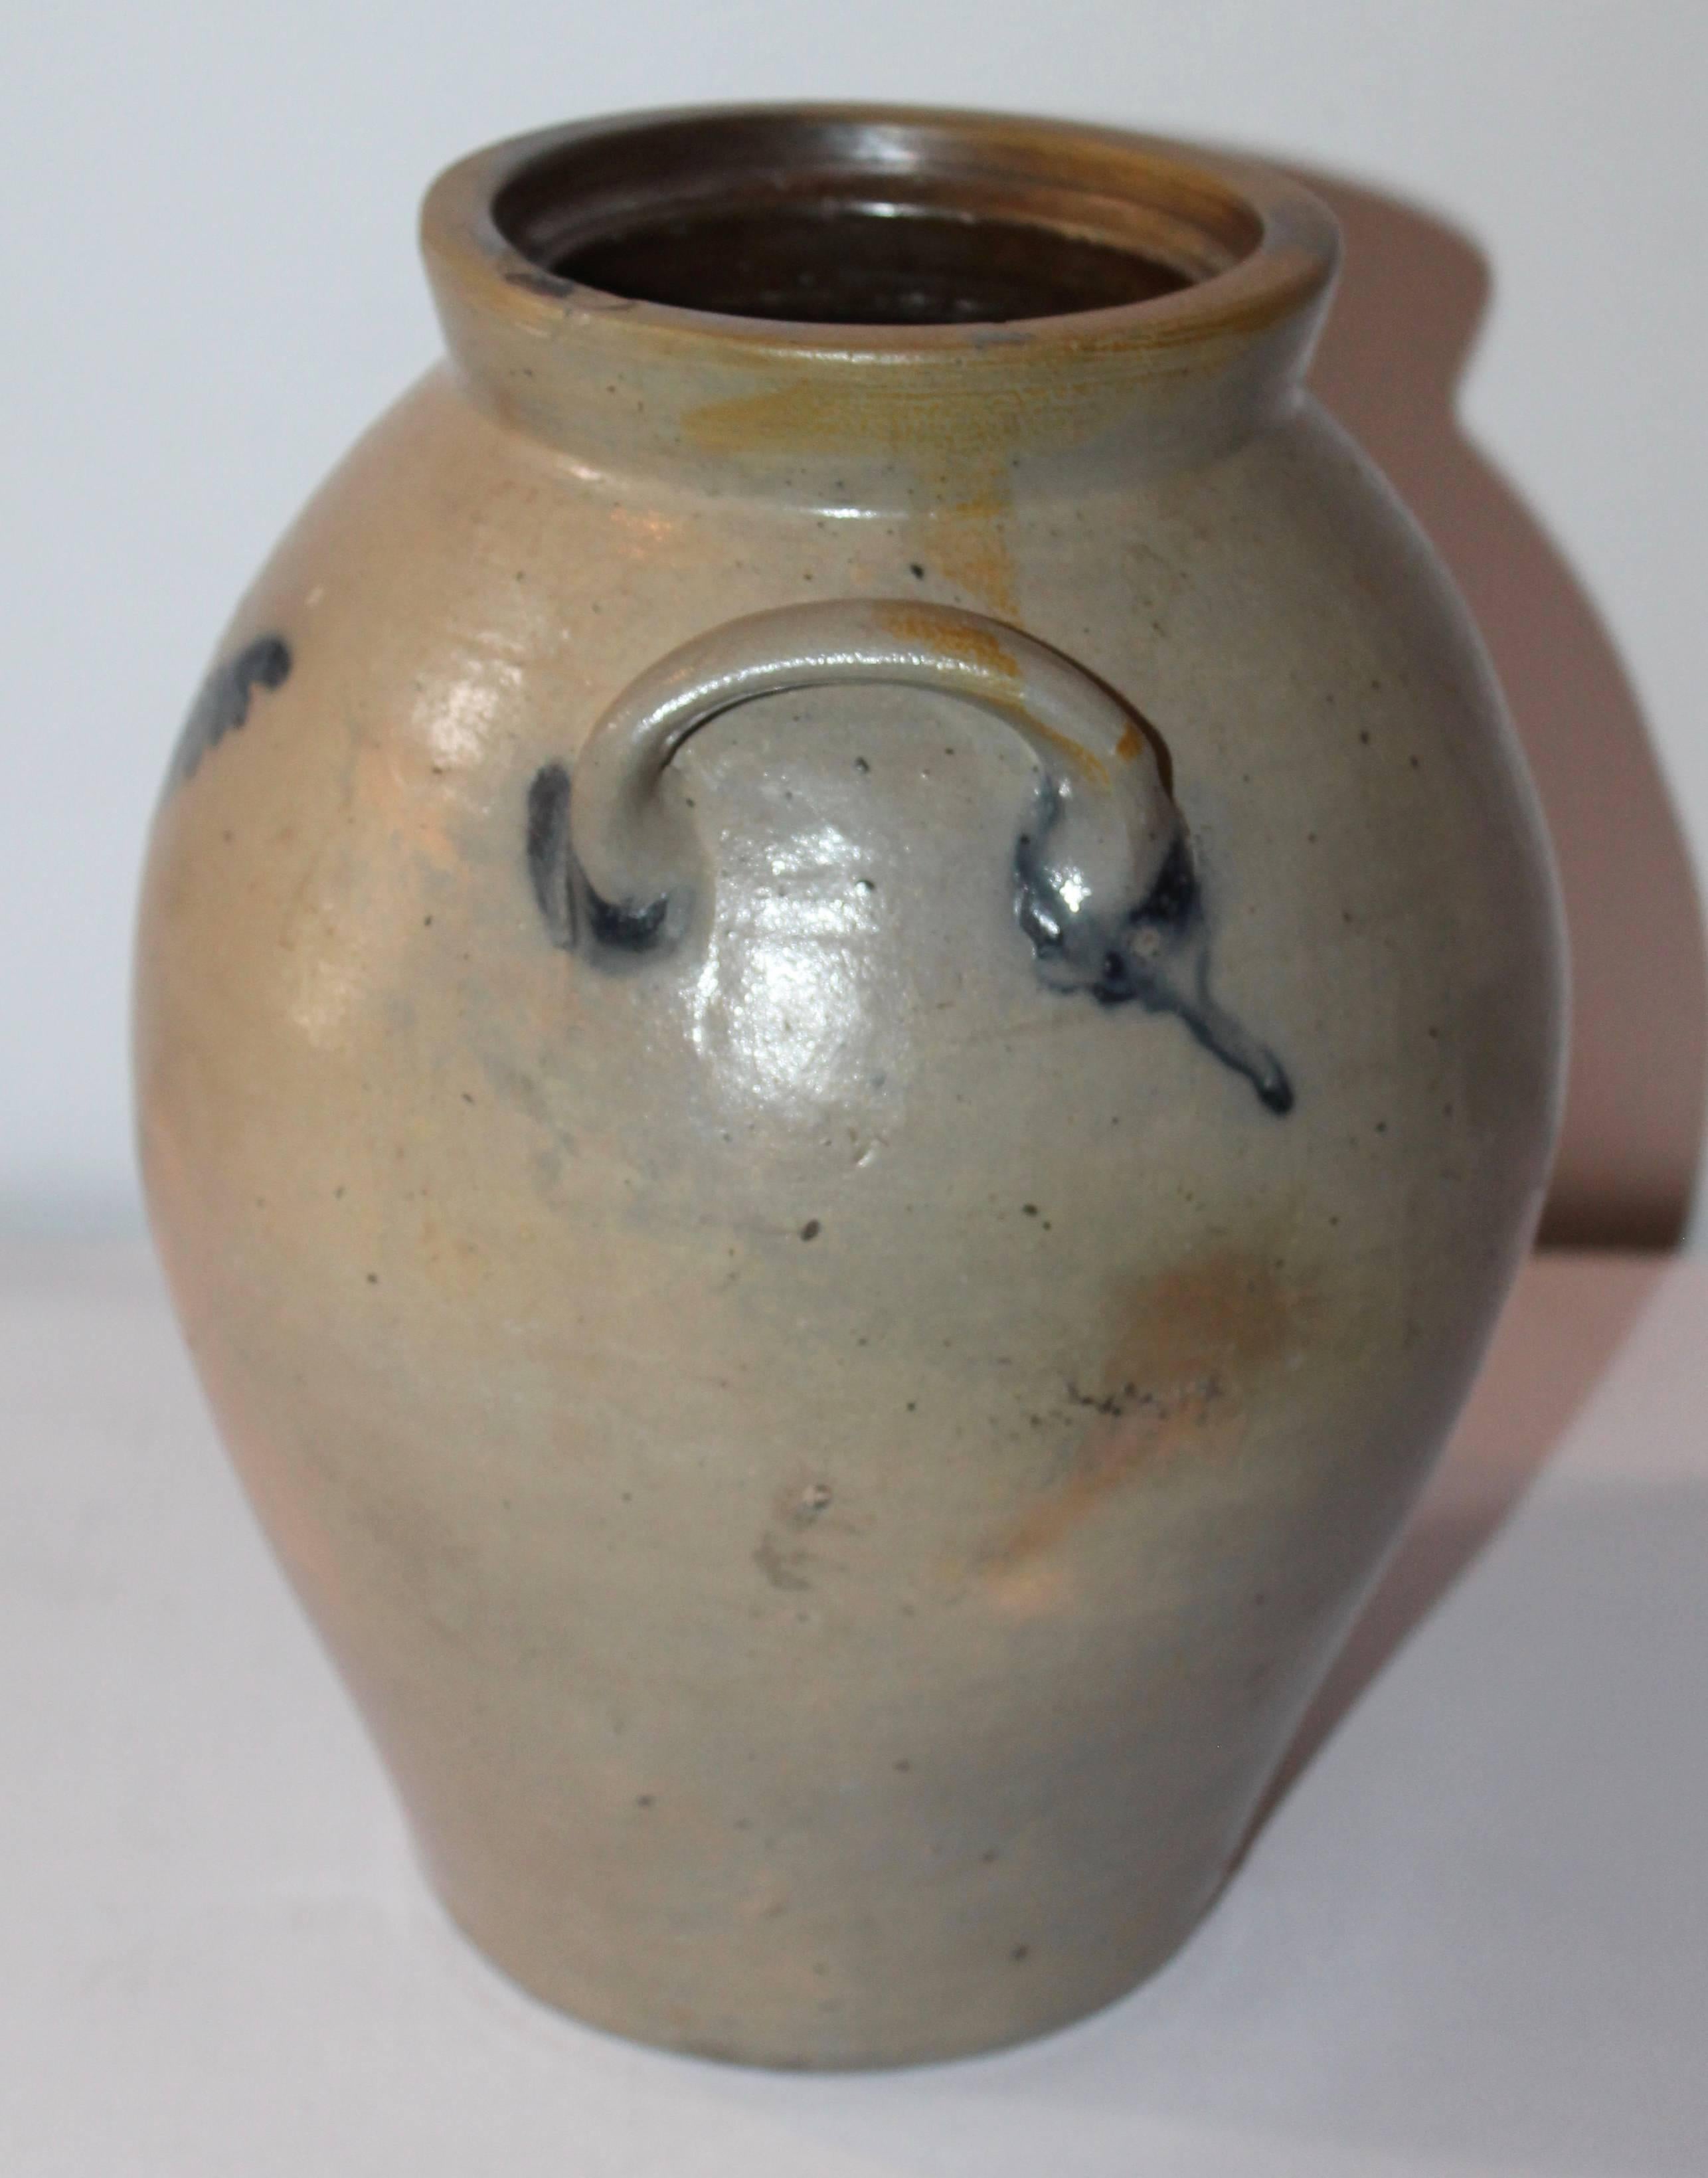 19th century blue salt glaze jar with blue decoration on face and handles. This amazing early folky pot is great addition to any Folk Art or Americana collection. The condition is very good. The piece was purchased without the lid.